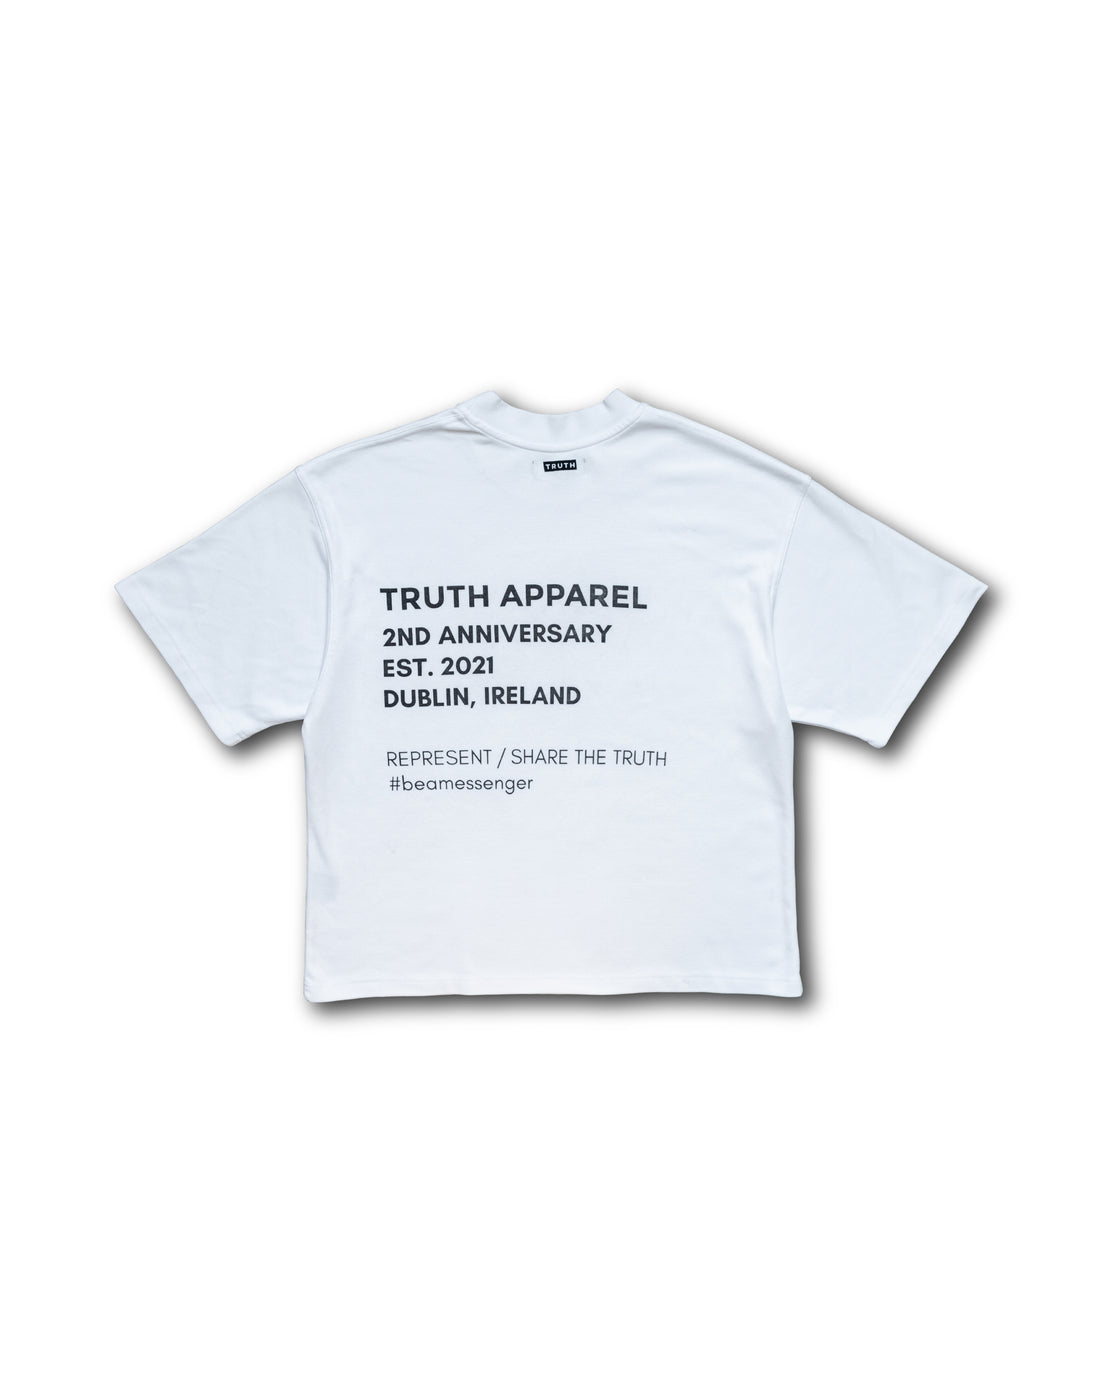 2ND ANNIVERSARY TEE - Members only